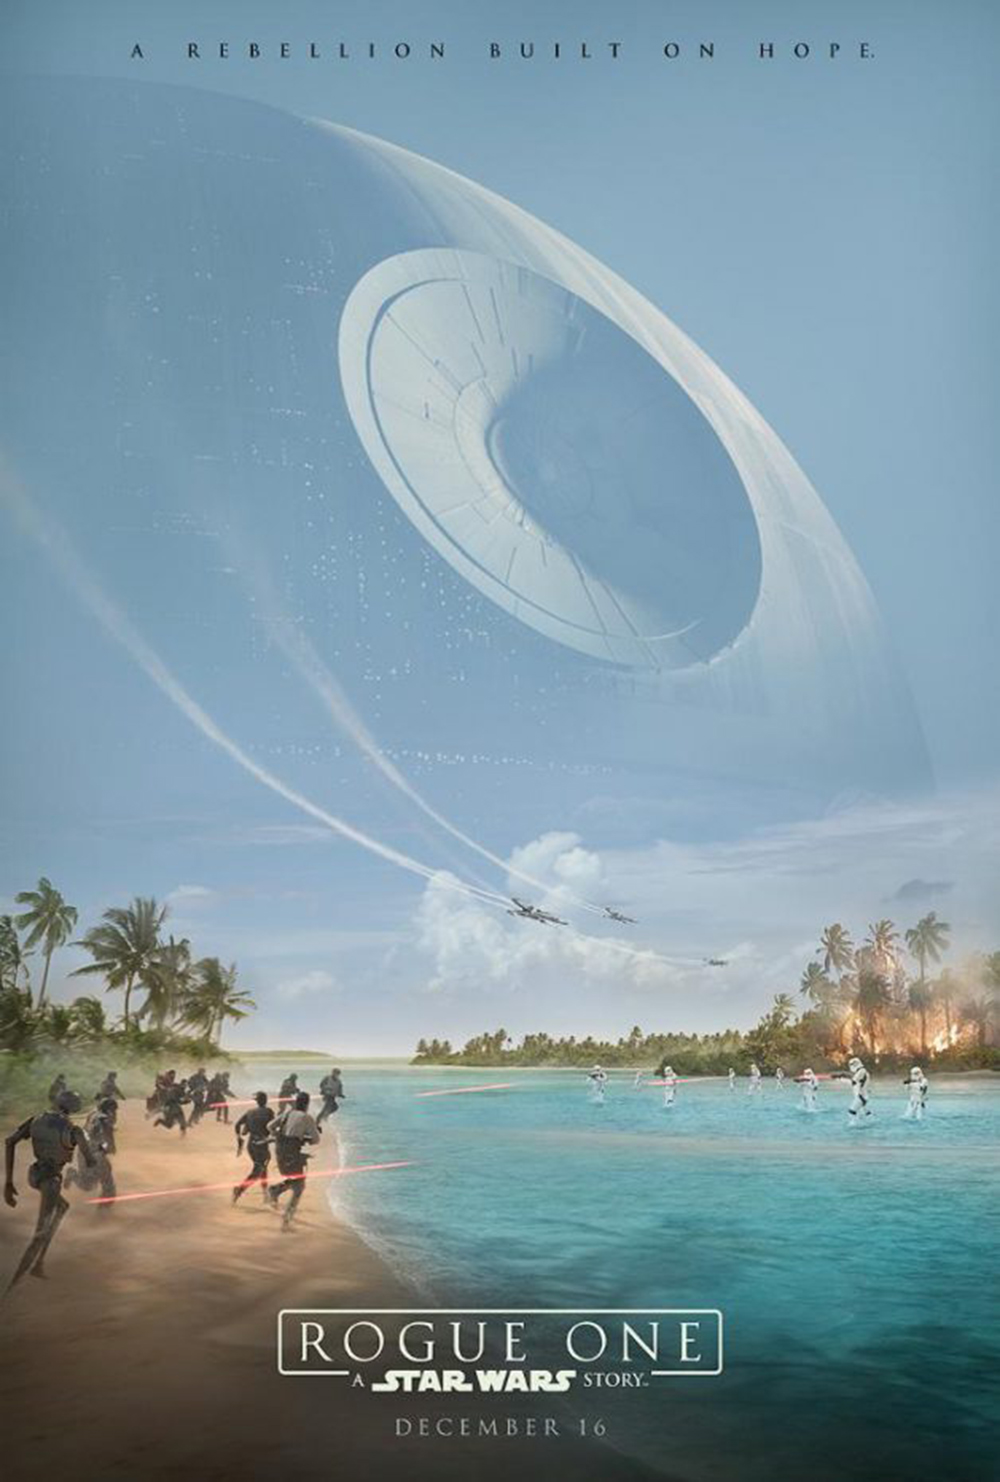 Rogue-One-Poster.jpg